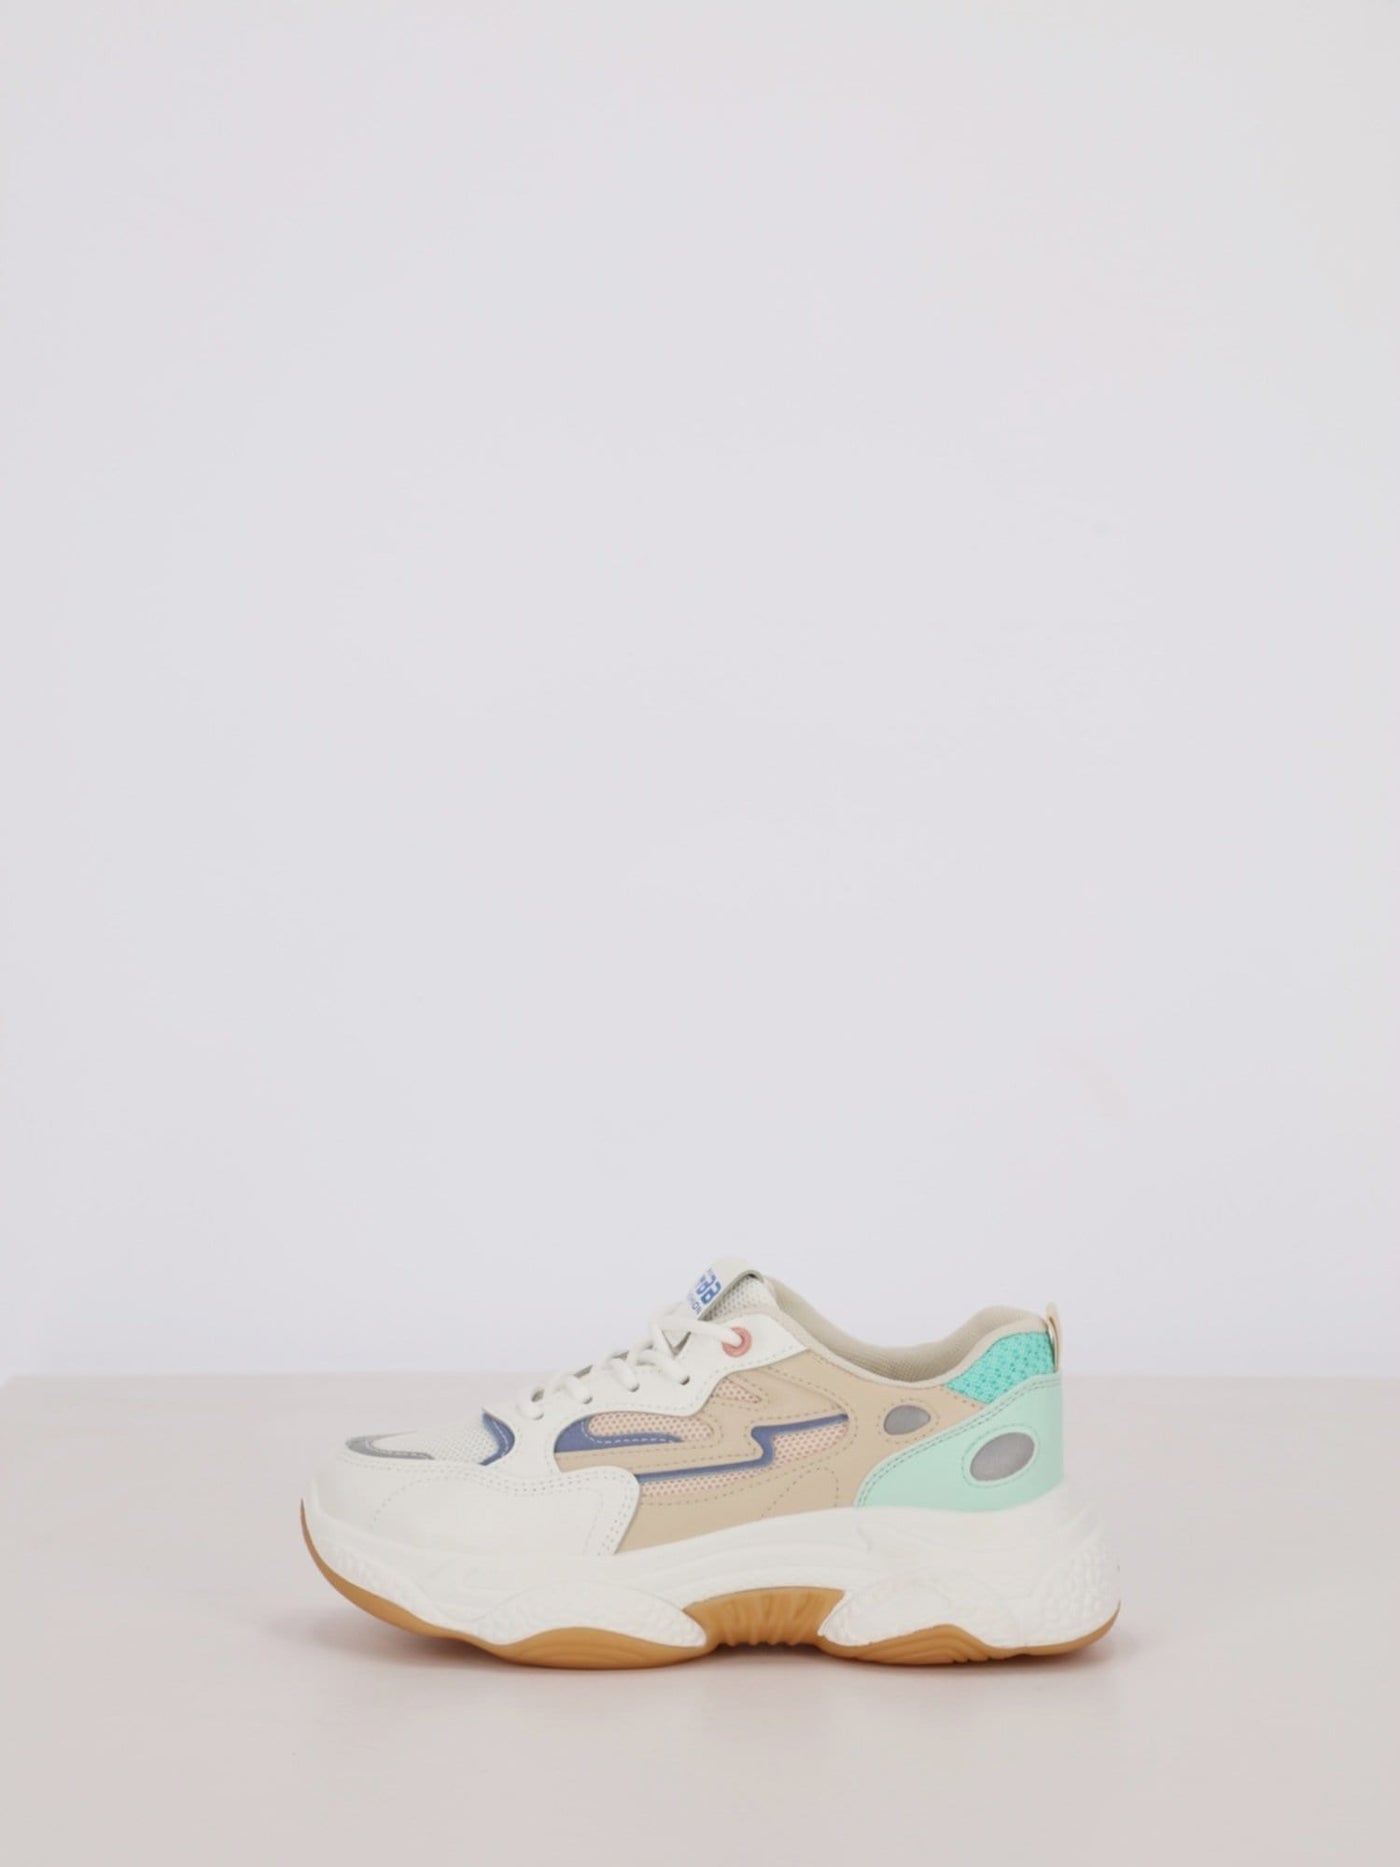 OR Sneakers White / 36 Mega Platform Sneakers with Leather and Mesh